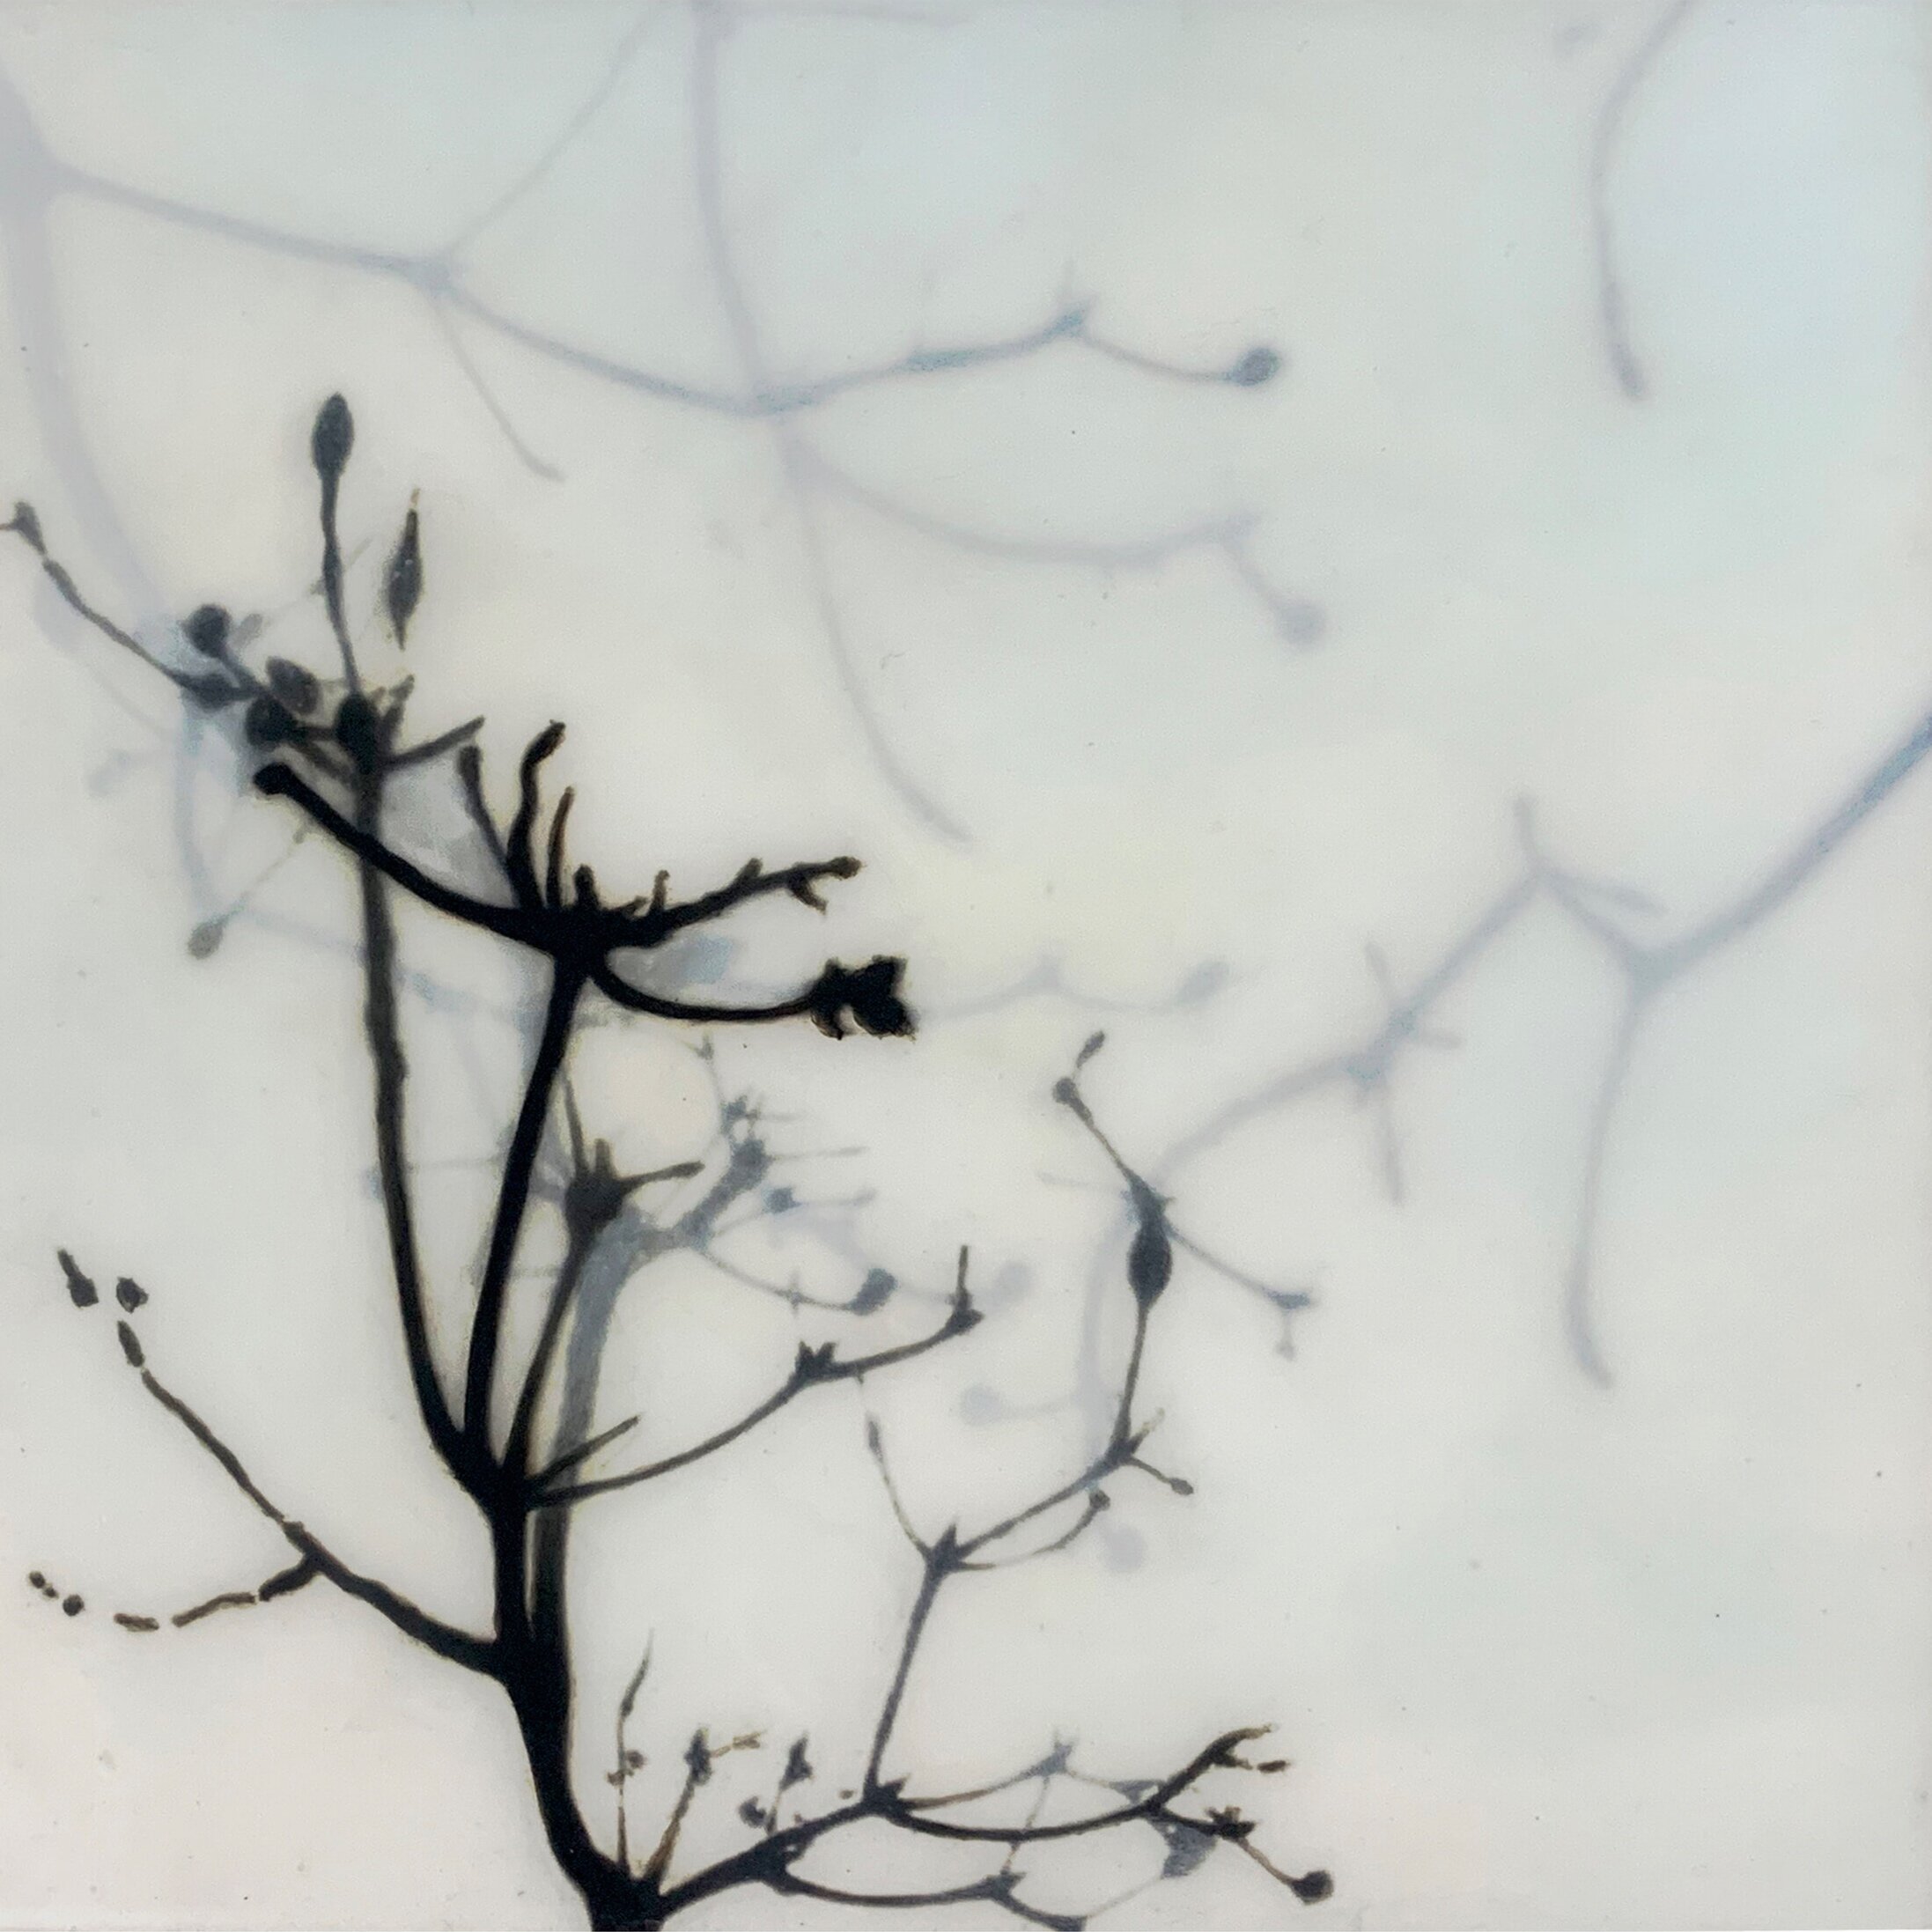  Jo Peterson   Branches #13 , 2019  Inkjet print, vine charcoal, and acrylic glazes on cradled panel  8 x 8 x 1.5 in.  YIMBY price $950 